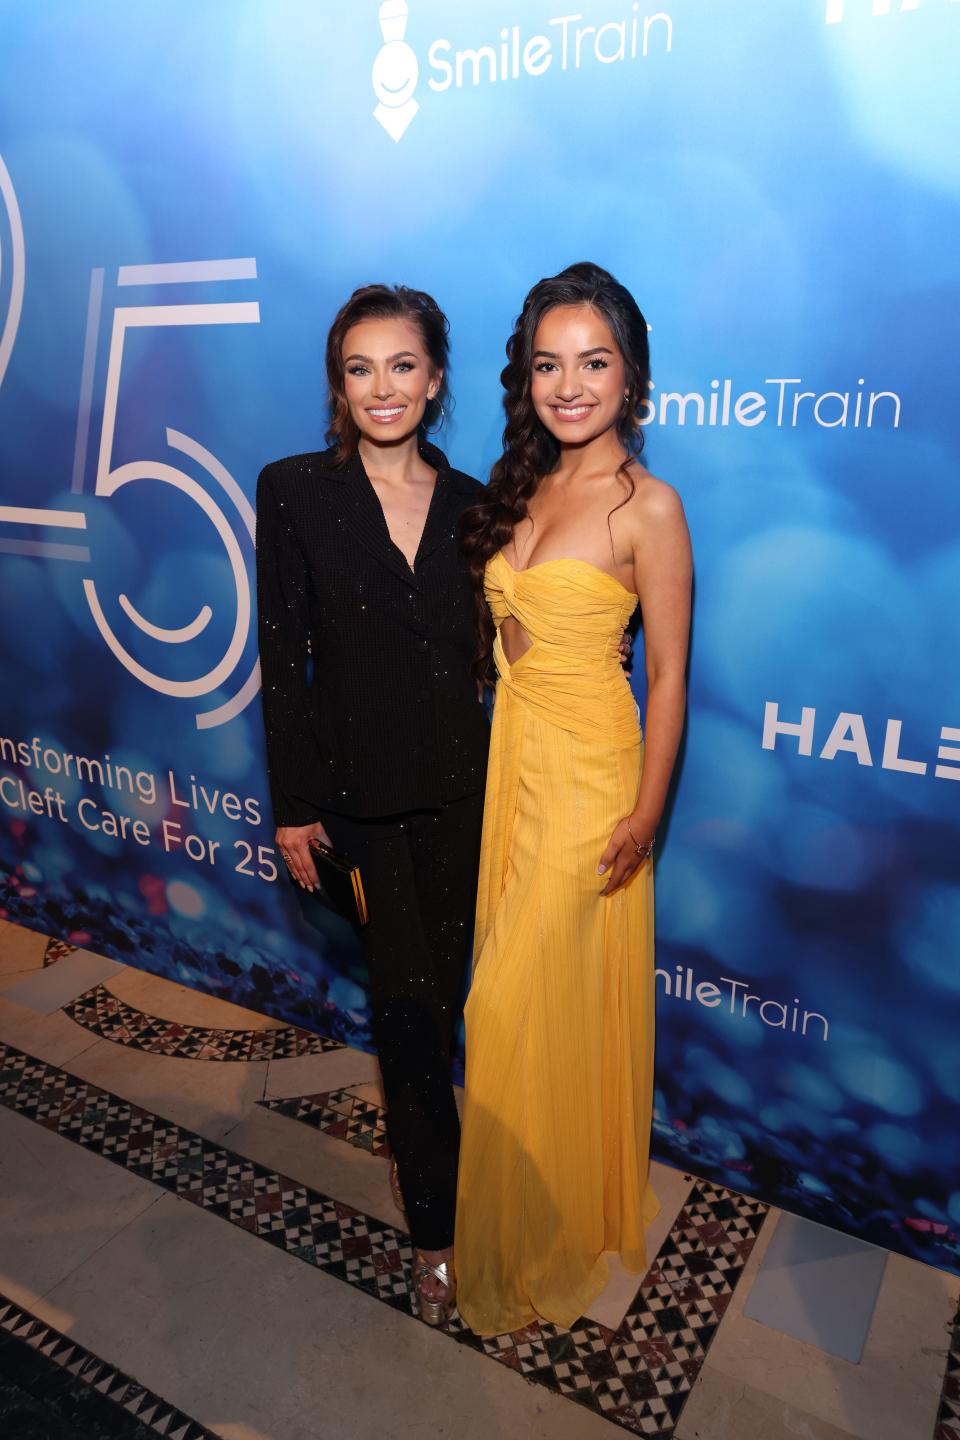 The day Miss Teen USA 2023 winner UmaSofia Srivastava announced her resignation, she and Noelia Voigt — who'd renounced her Miss USA 2023 title earlier in the week — attended Smile Train's 25th anniversary gala.